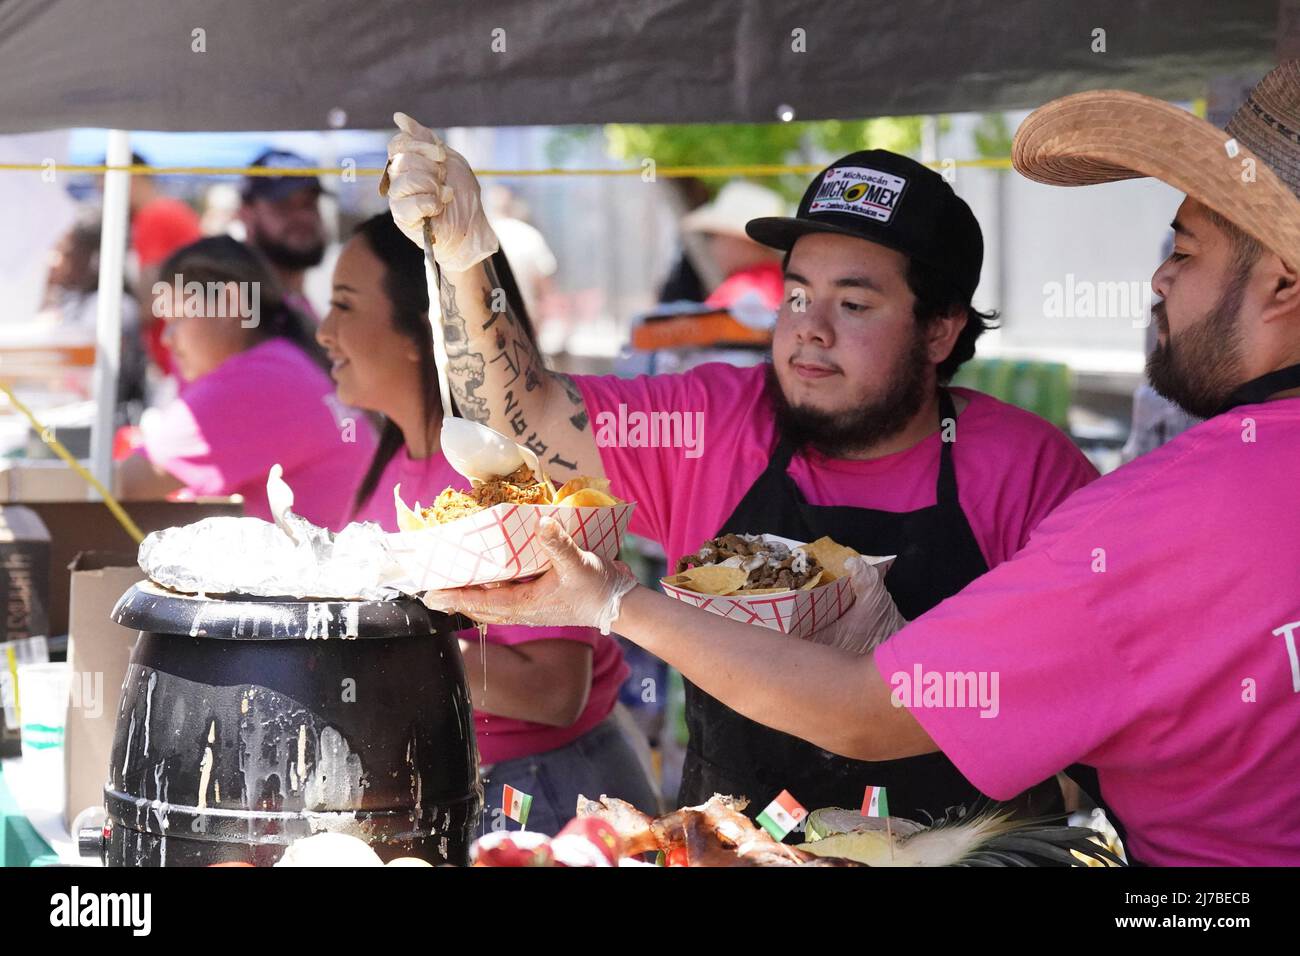 St. Louis, United States. 08th May, 2022. Sauces are applied to food at one of the many food stations at the Cinco de Mayo celebration in St. Louis on Saturday, May 7, 2022. Photo by Bill Greenblatt/UPI Credit: UPI/Alamy Live News Stock Photo